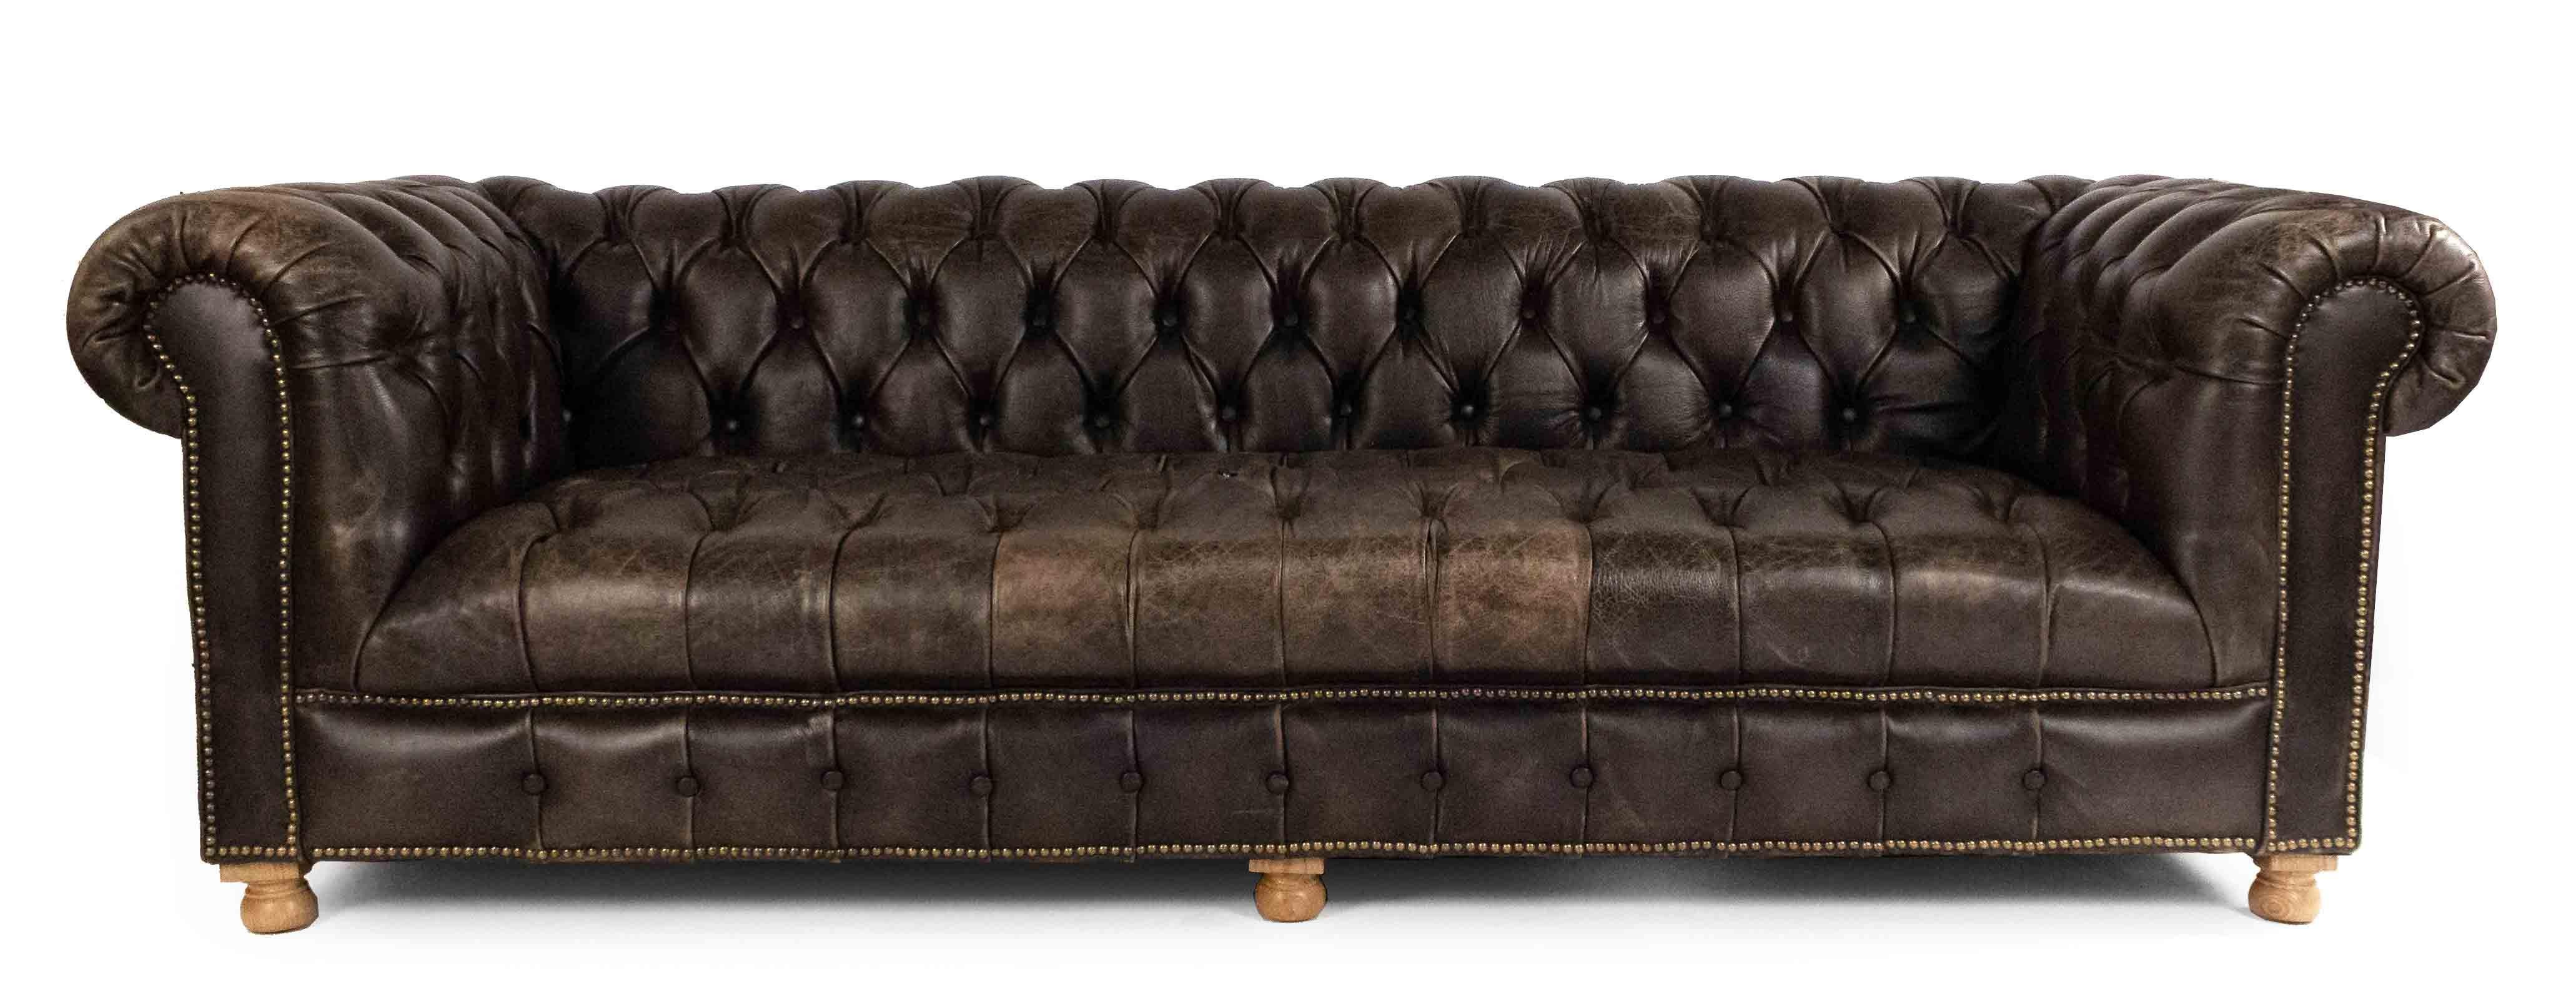 English Victorian style dark brown tufted leather seat and back chesterfield sofa with out-scrolled arms and brass nail head trim resting on wooden brown feet.
  